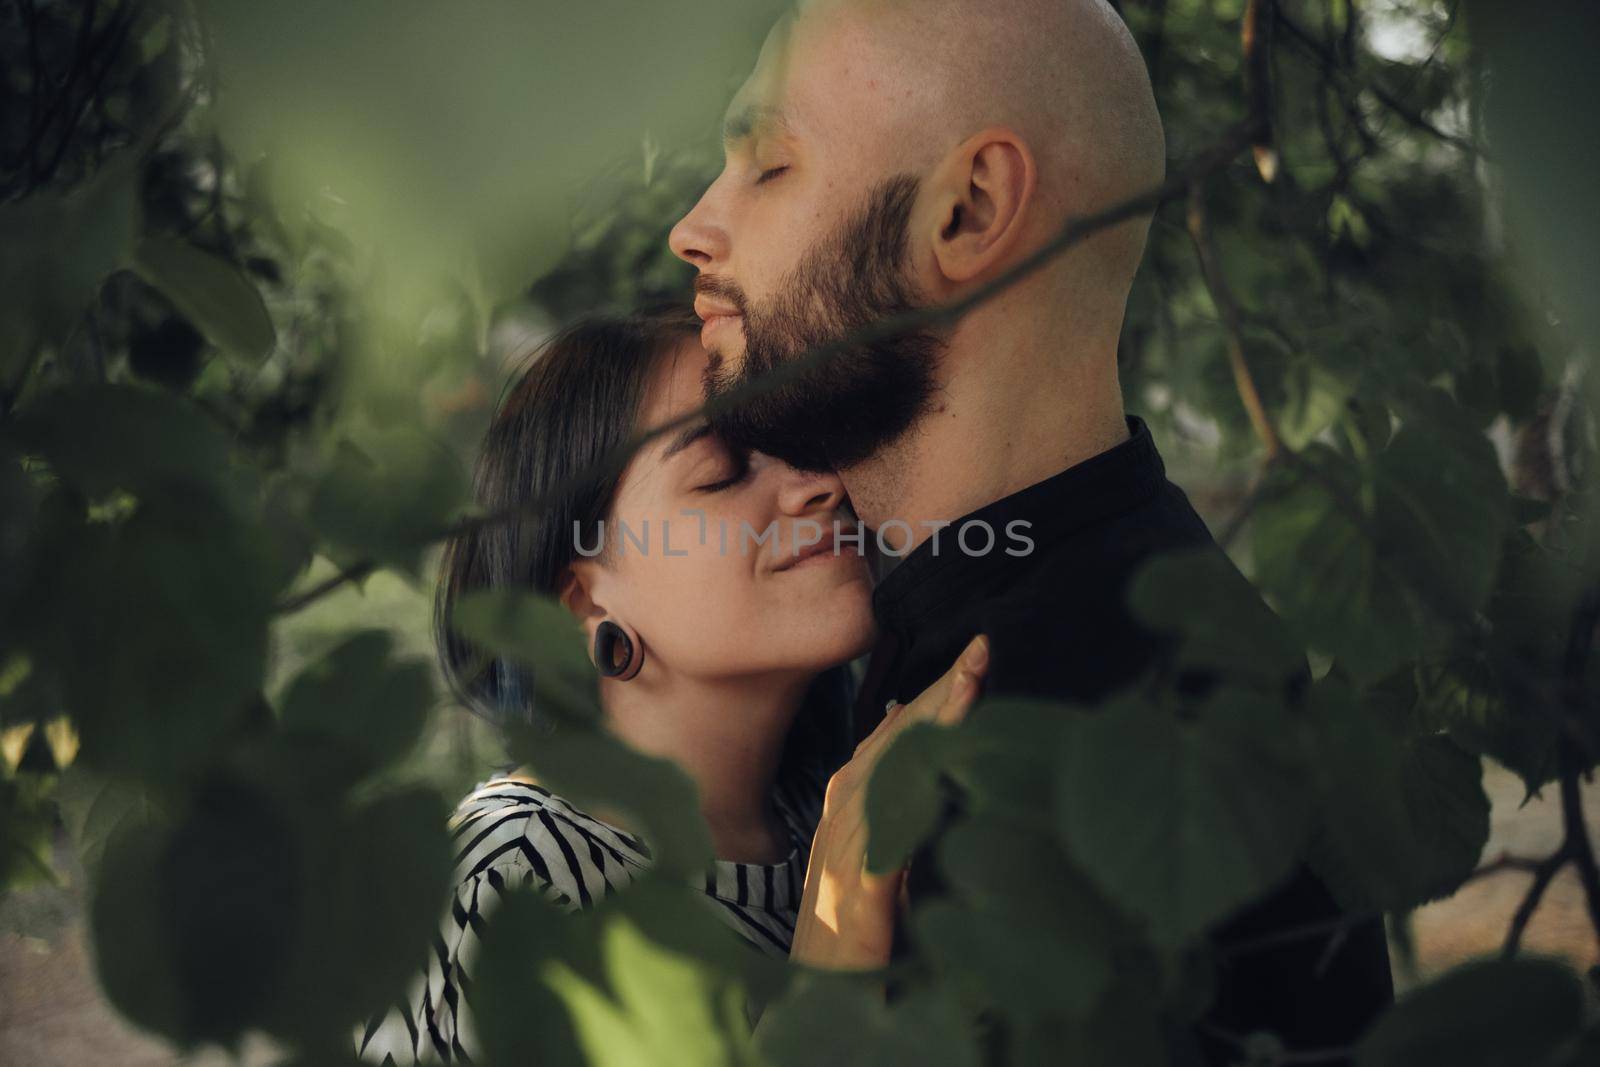 the couple in love hid from everyone in the foliage of the tree. gently hugged by Symonenko